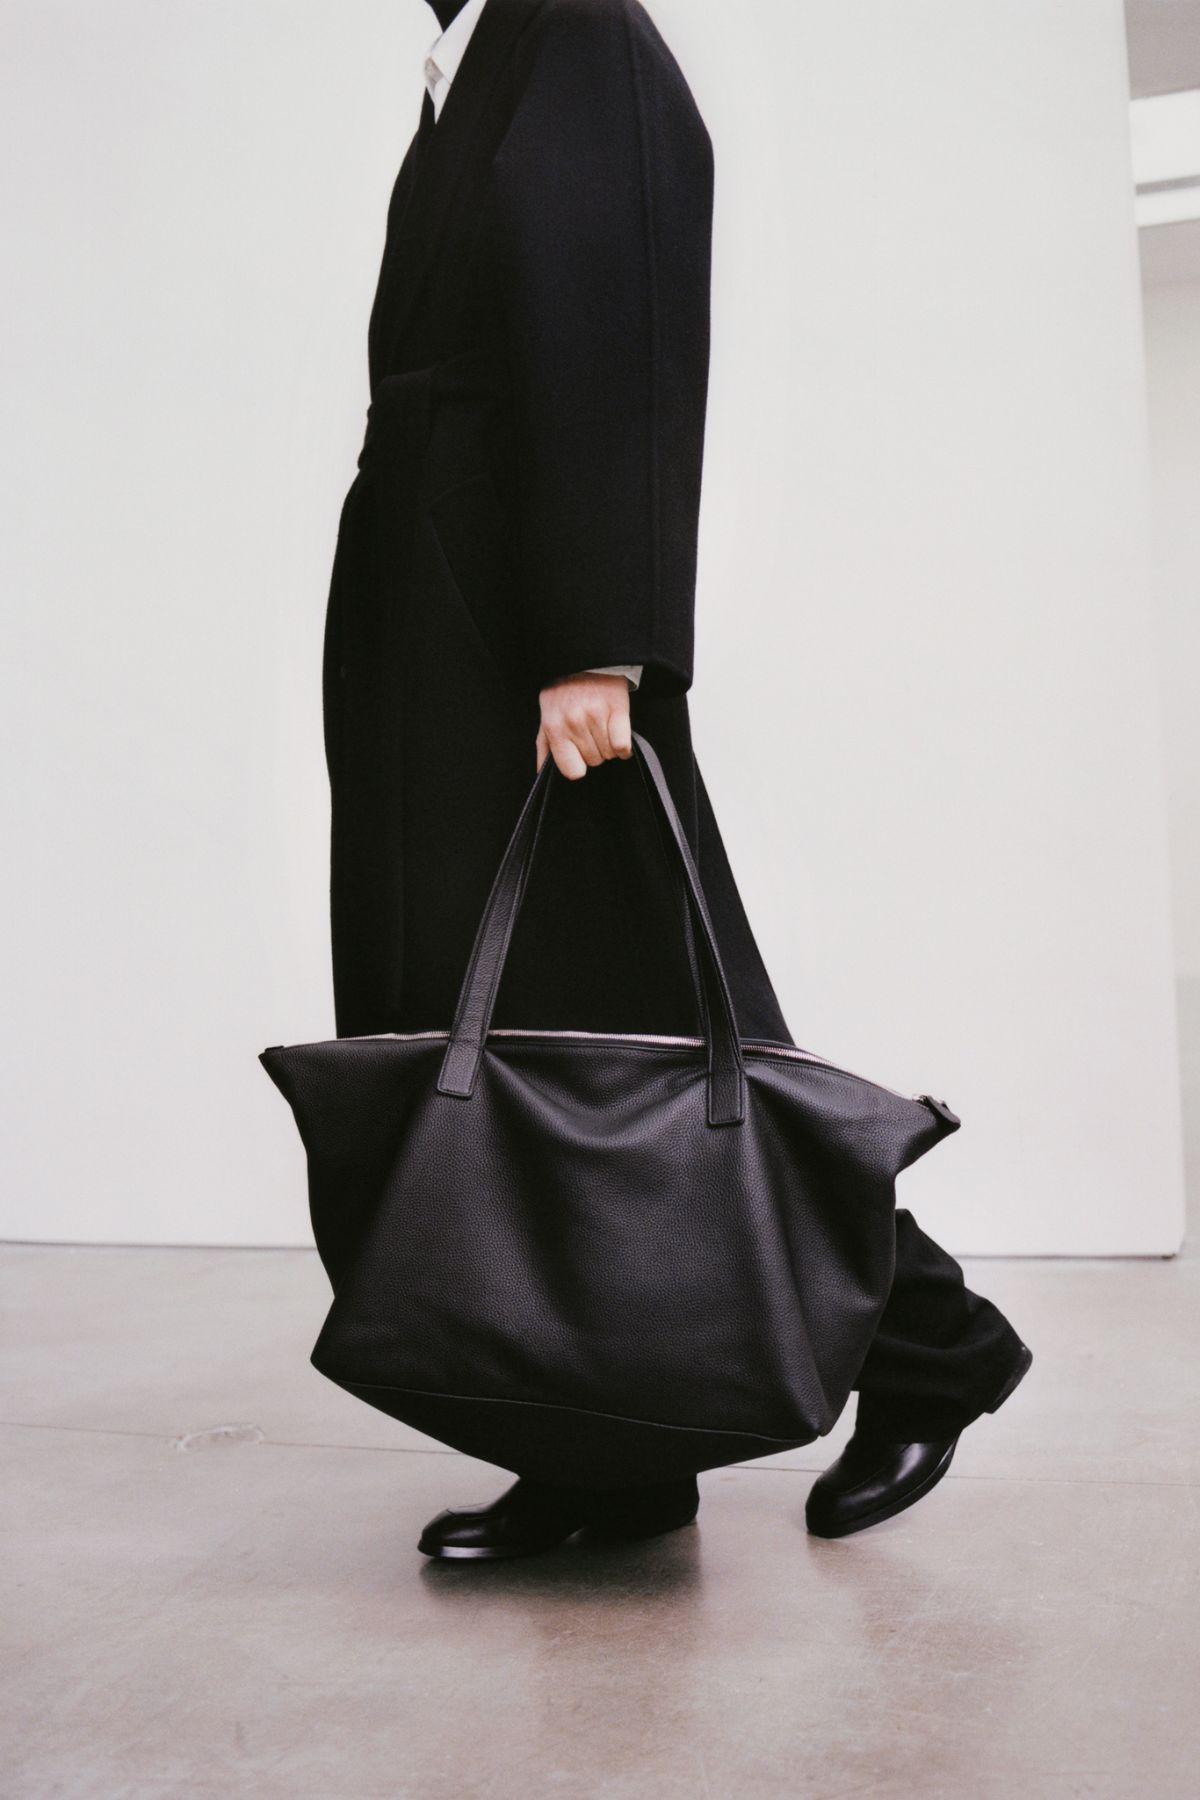 The Row Black Leather Tote Bag